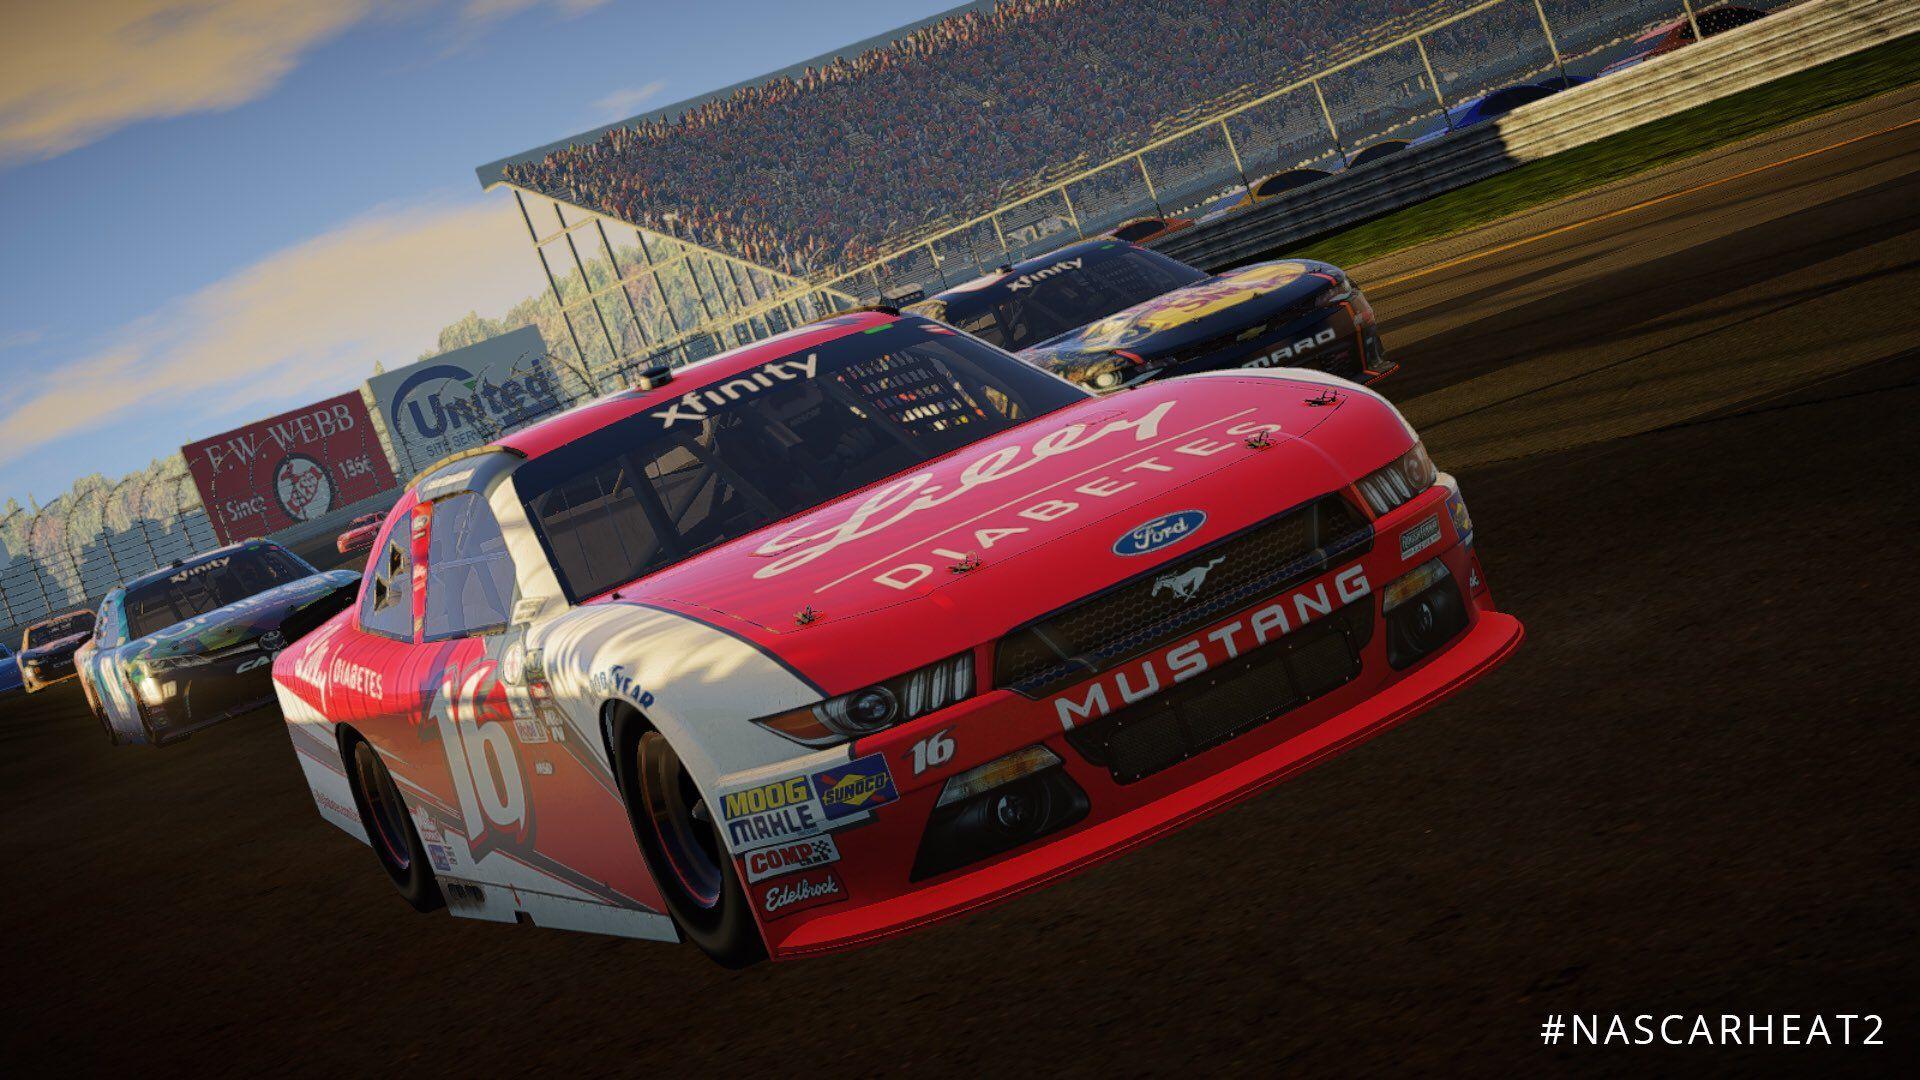 New NASCAR Heat 2 Preview Image Revealed